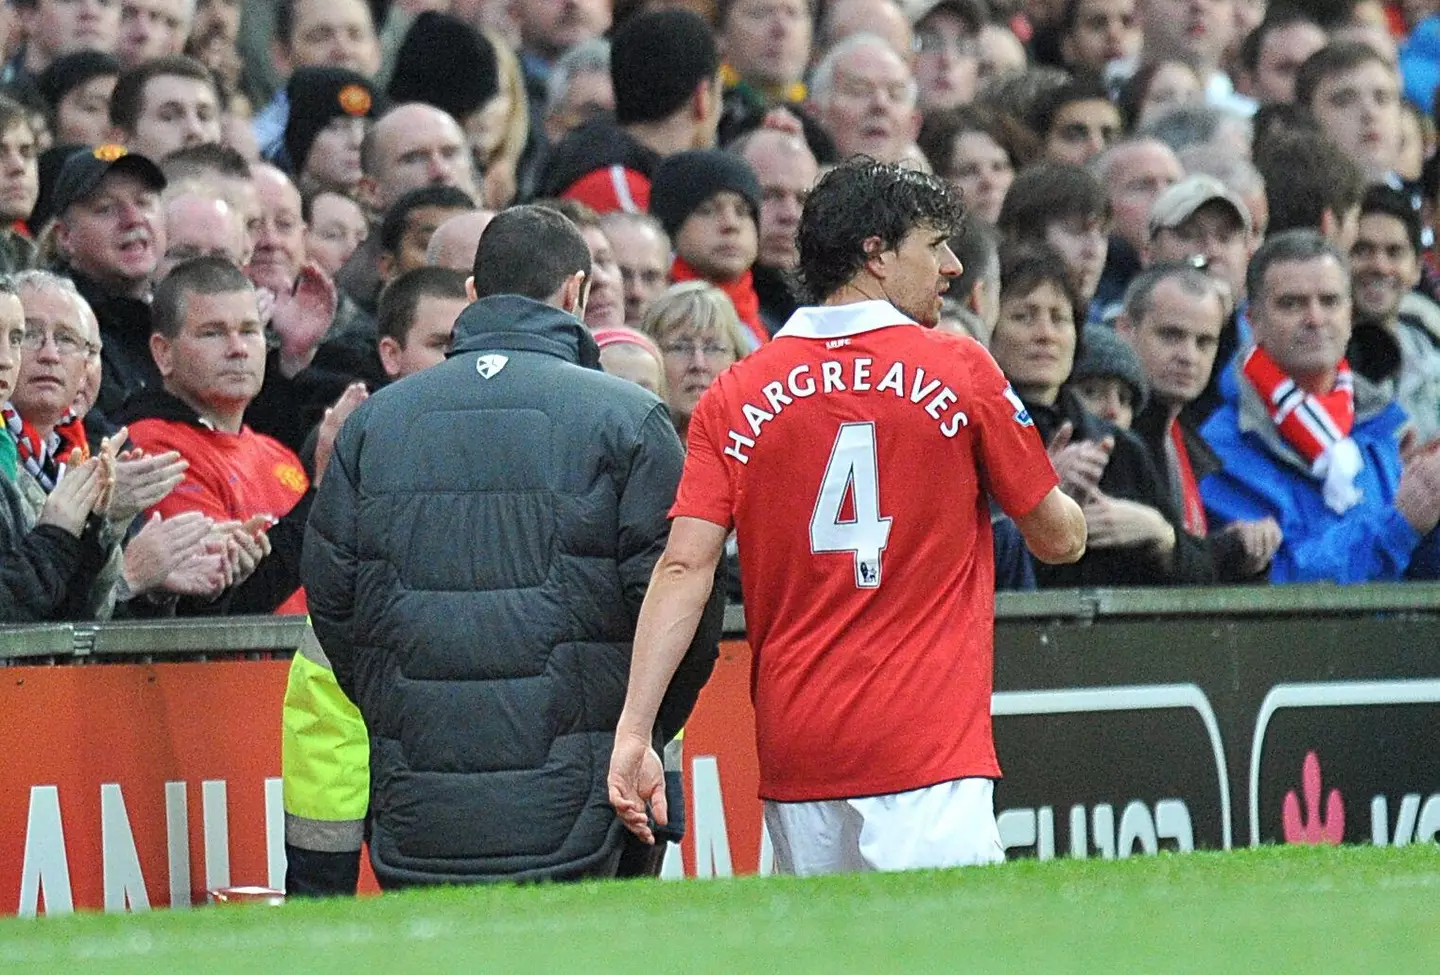 Injuries didn't help Hargreaves at Old Trafford. Image: Alamy